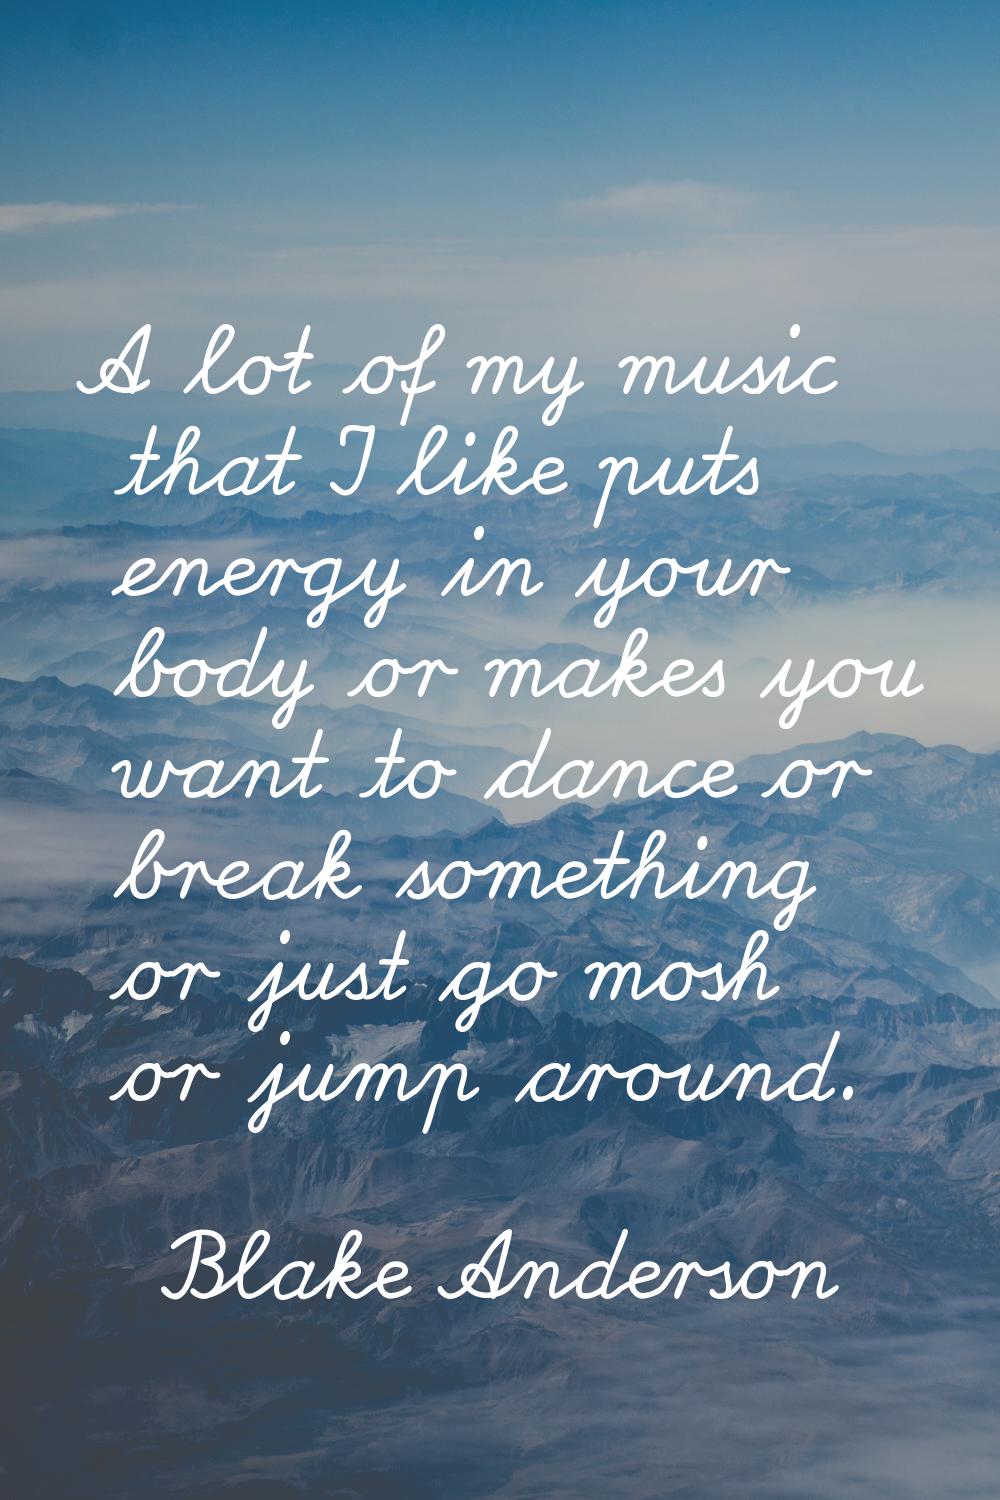 A lot of my music that I like puts energy in your body or makes you want to dance or break somethin